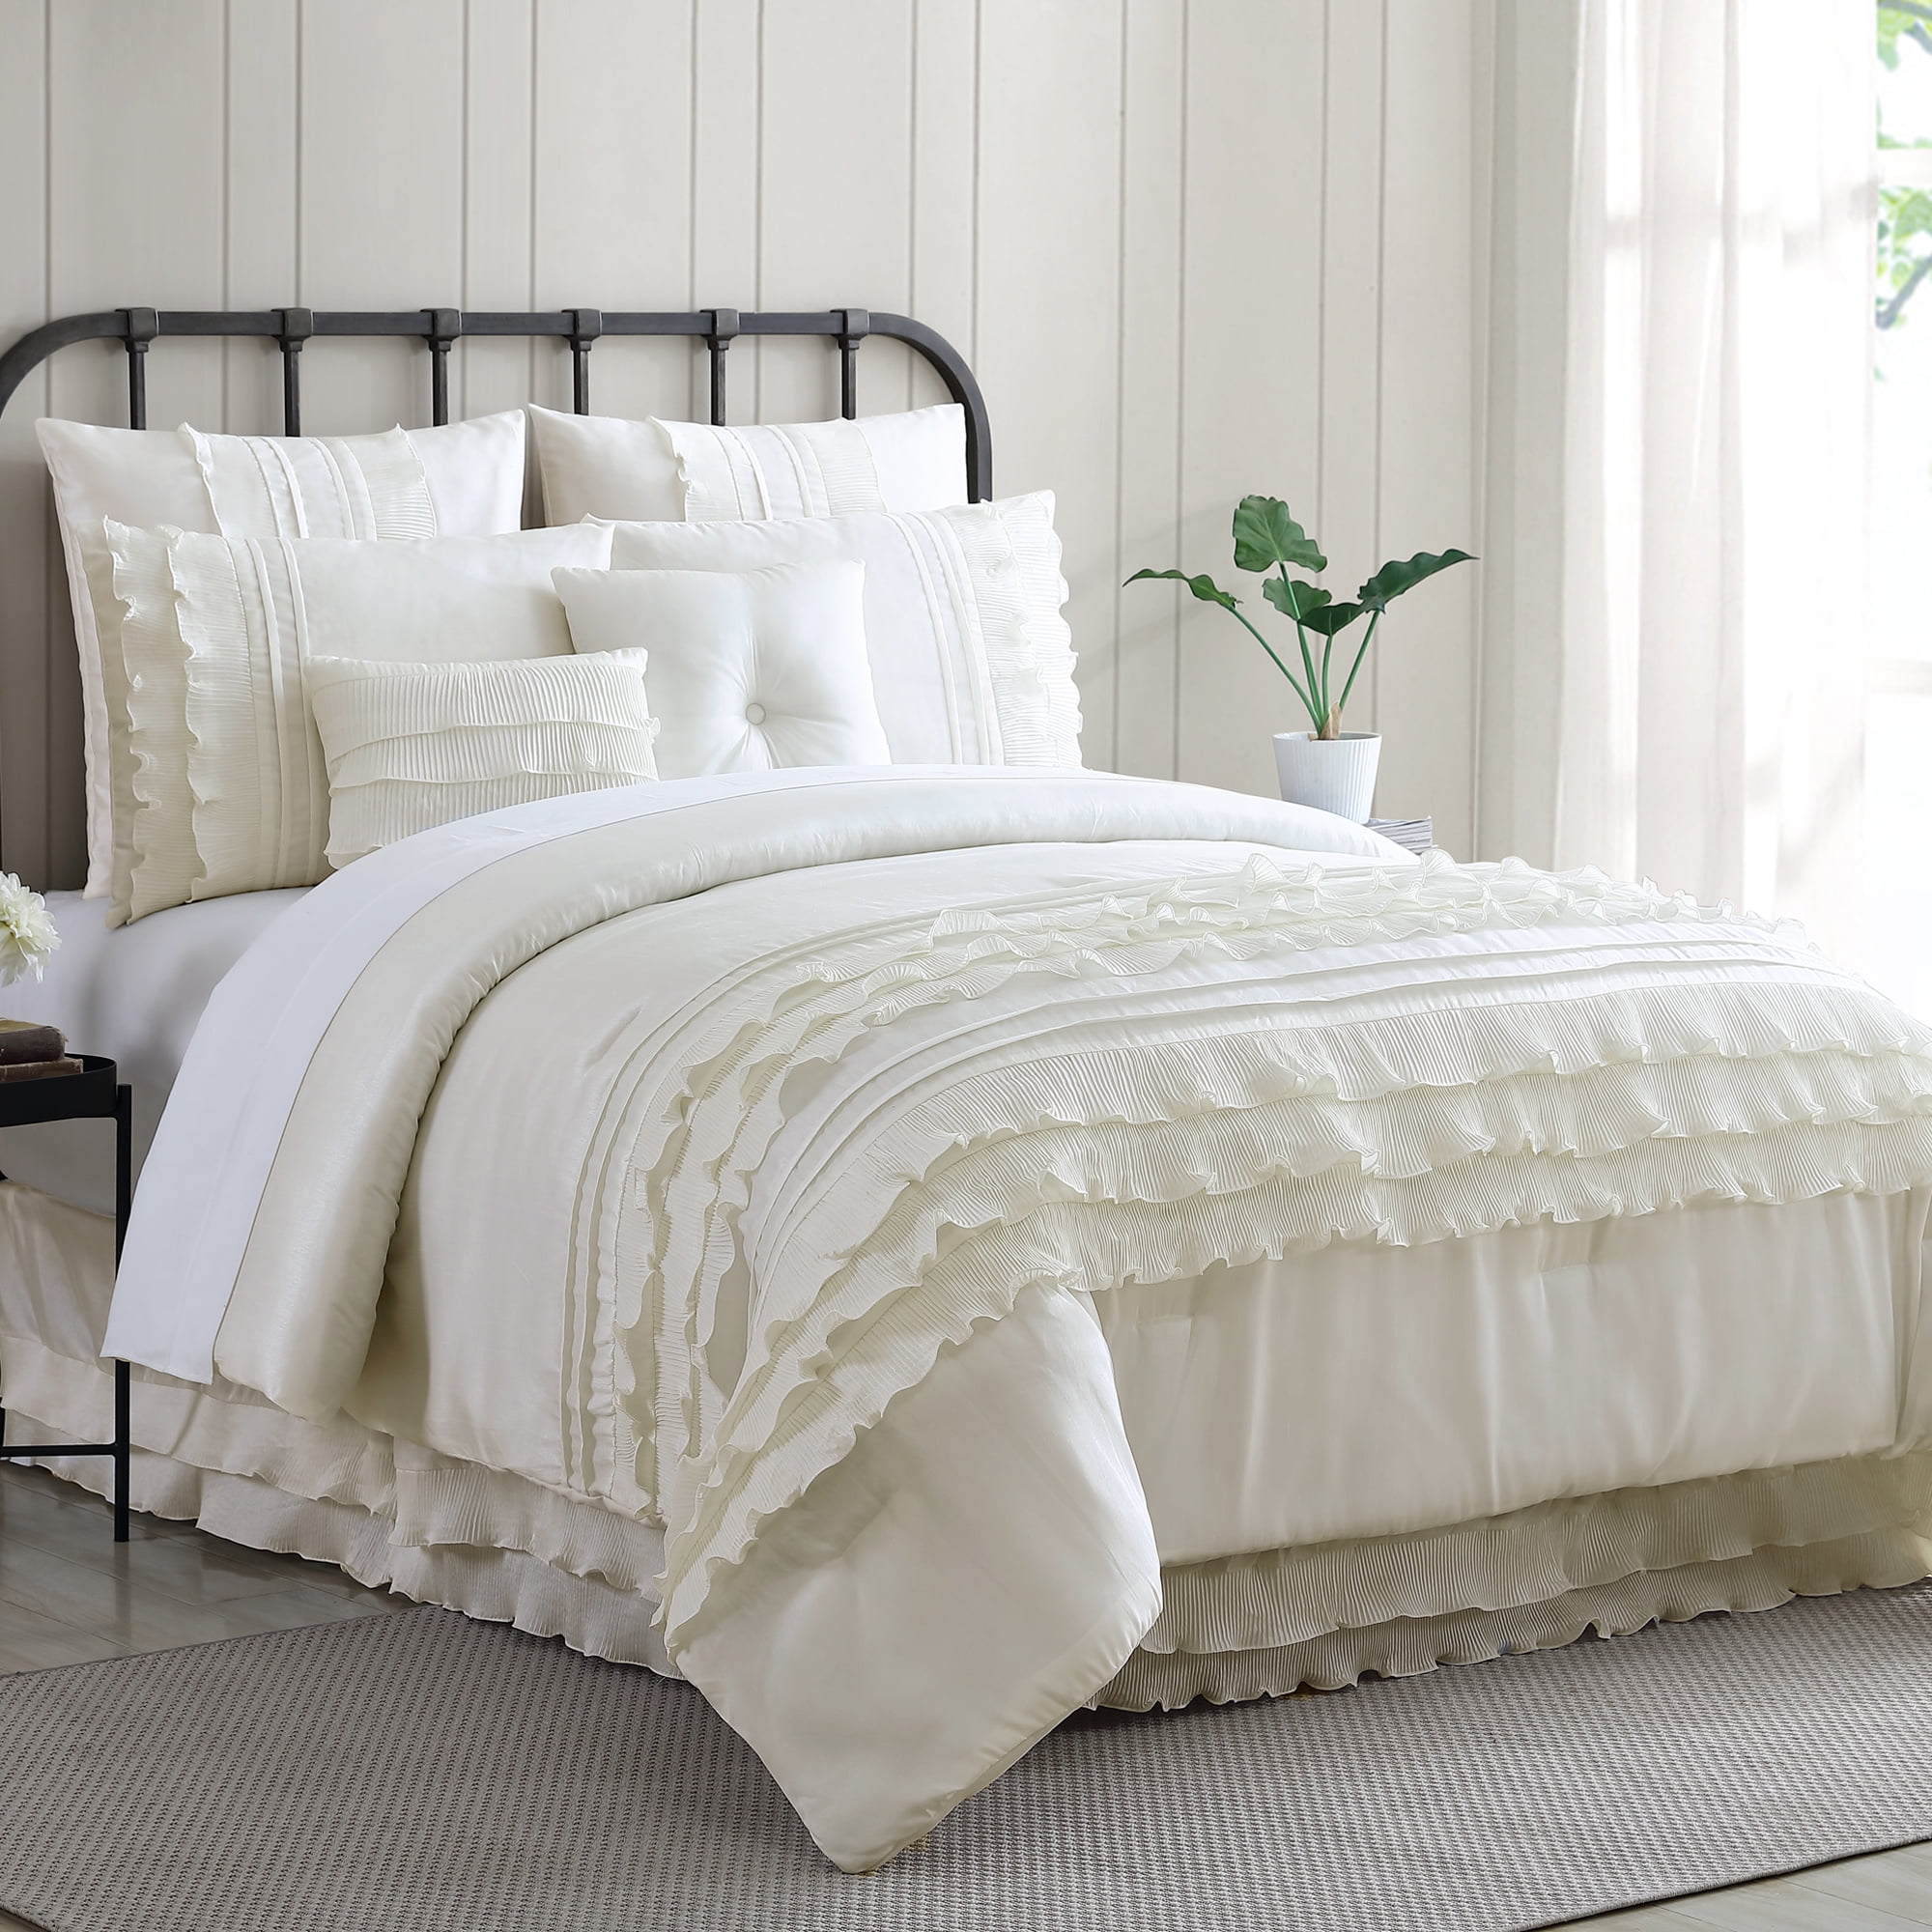 Details about   Lush Decor Reyna Comforter White Ruffled 3 Piece Set with Pillow Shams King 